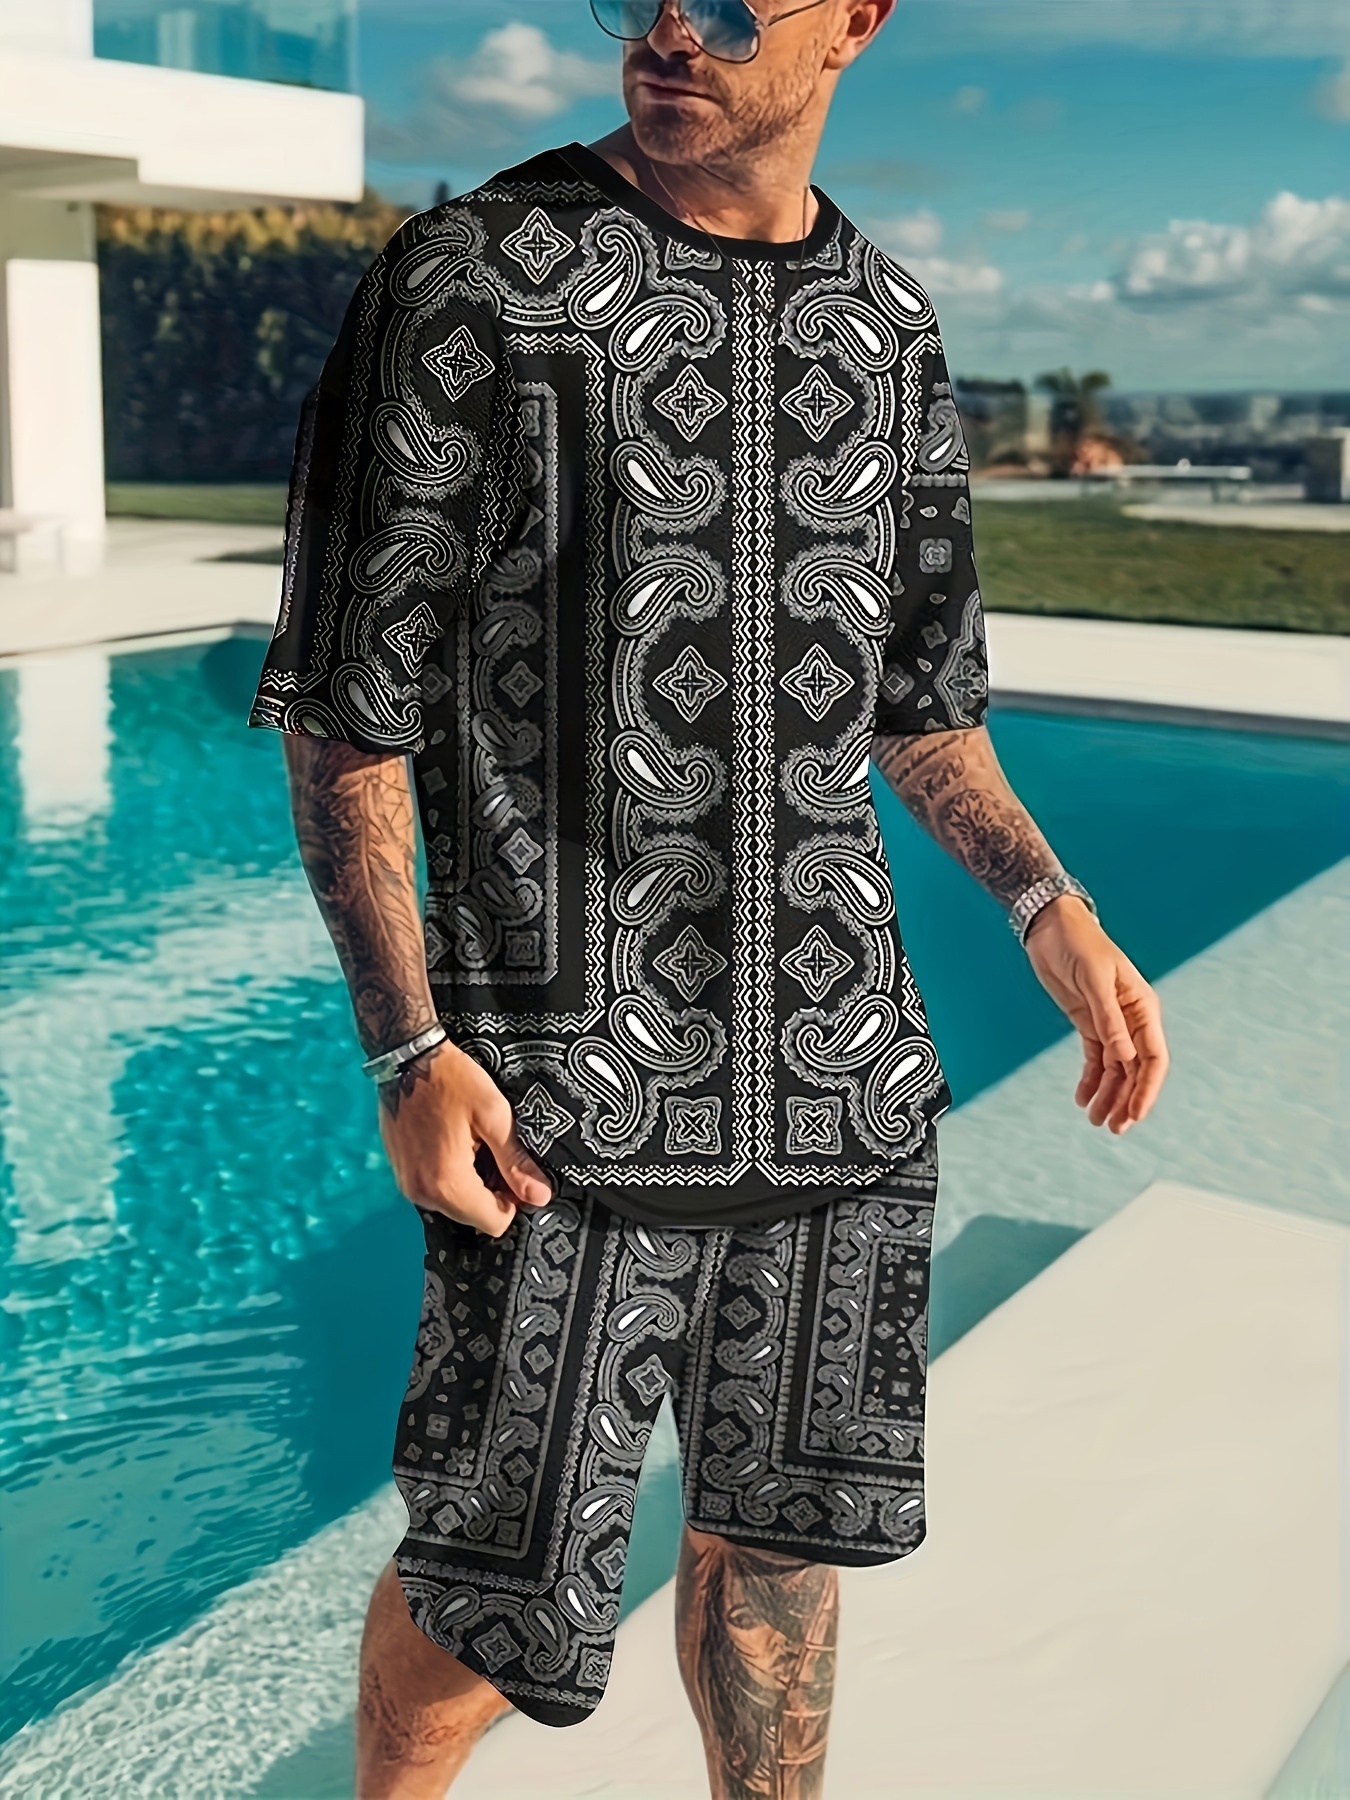 2 Piece Outfit Mens Trend Printed Shirt + Pants Set Casual Short